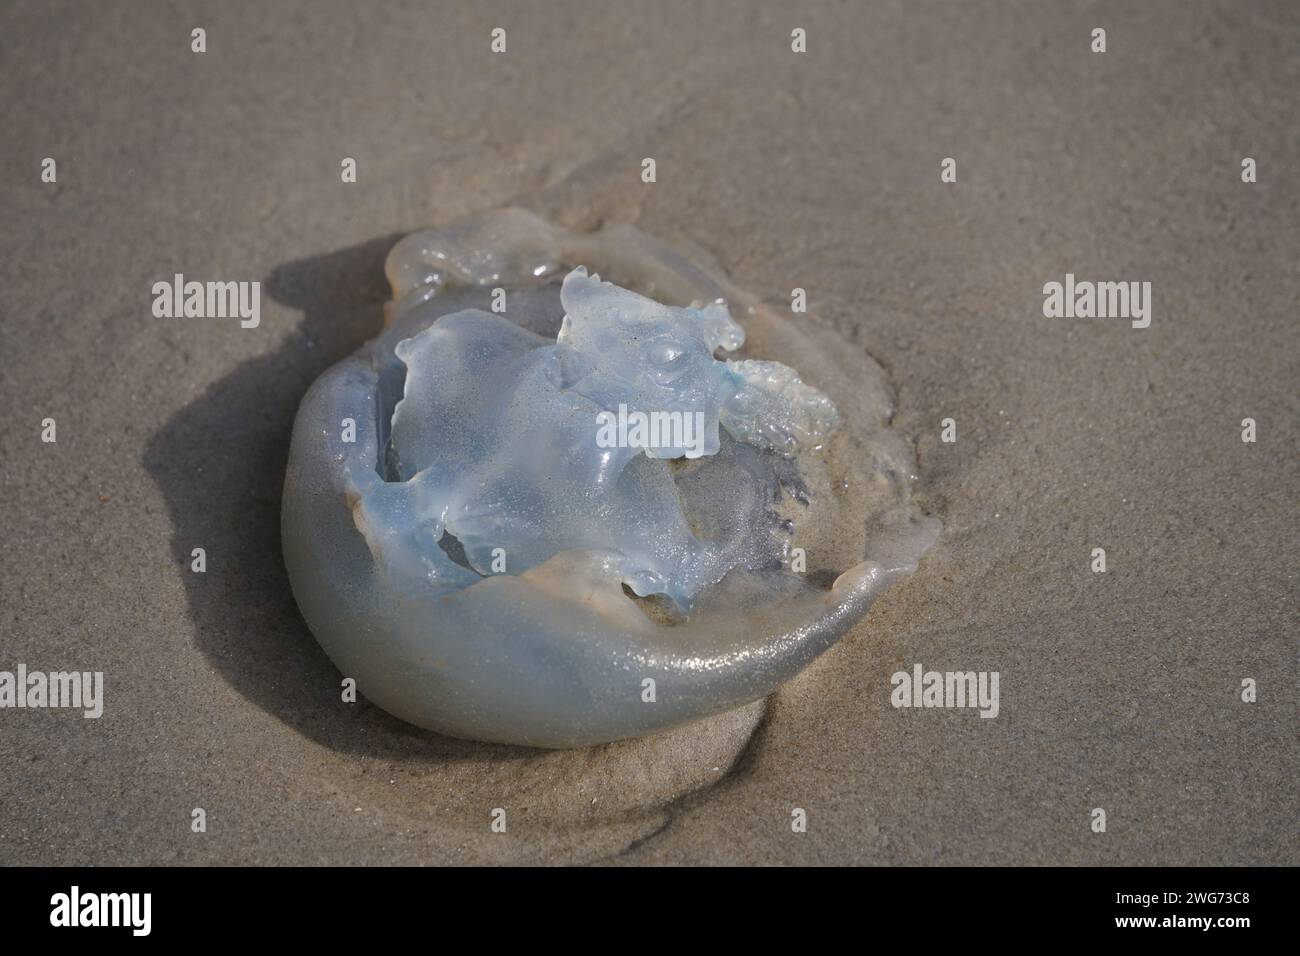 Dead blue cabbage bleb on the wet beach of Borkum in autumn Stock Photo